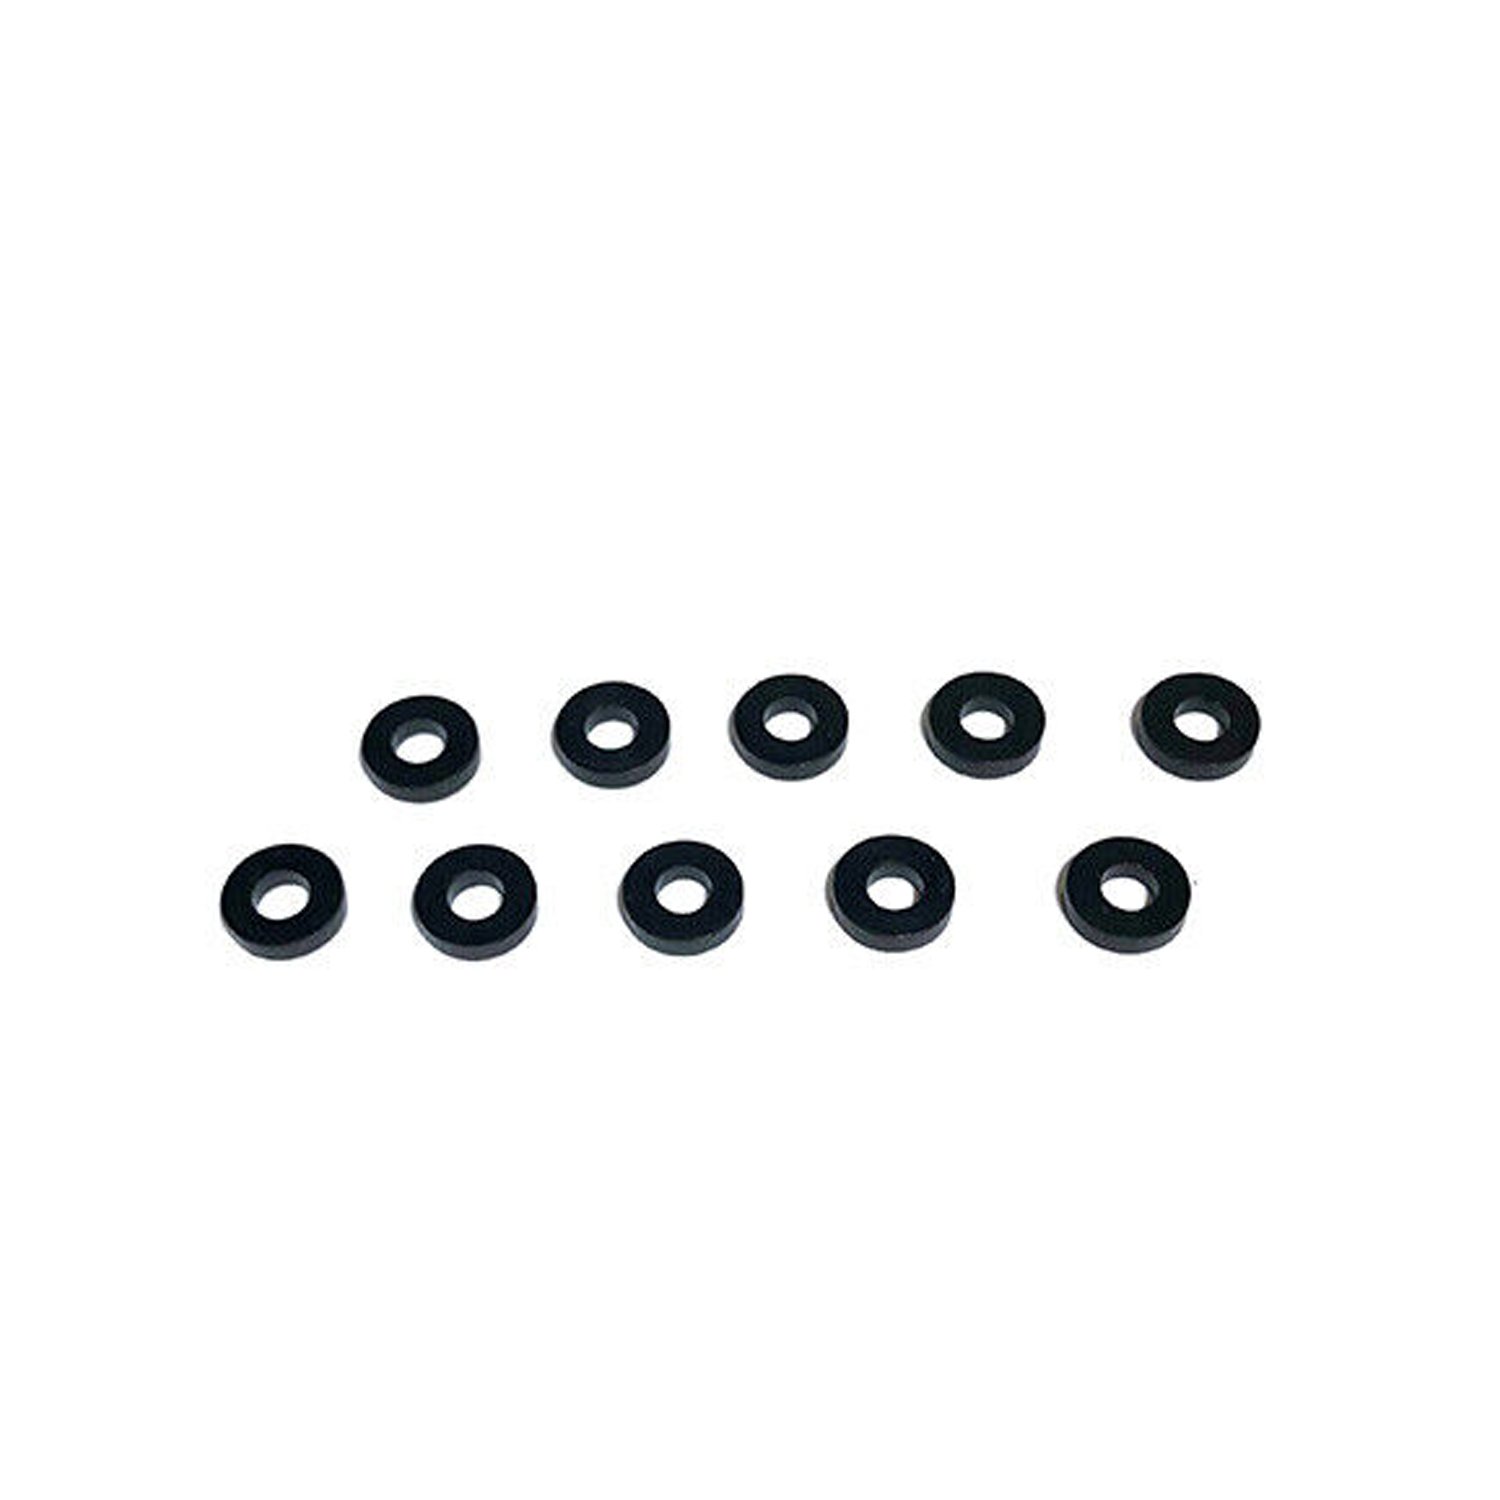 Gasket for 85510-E (10)